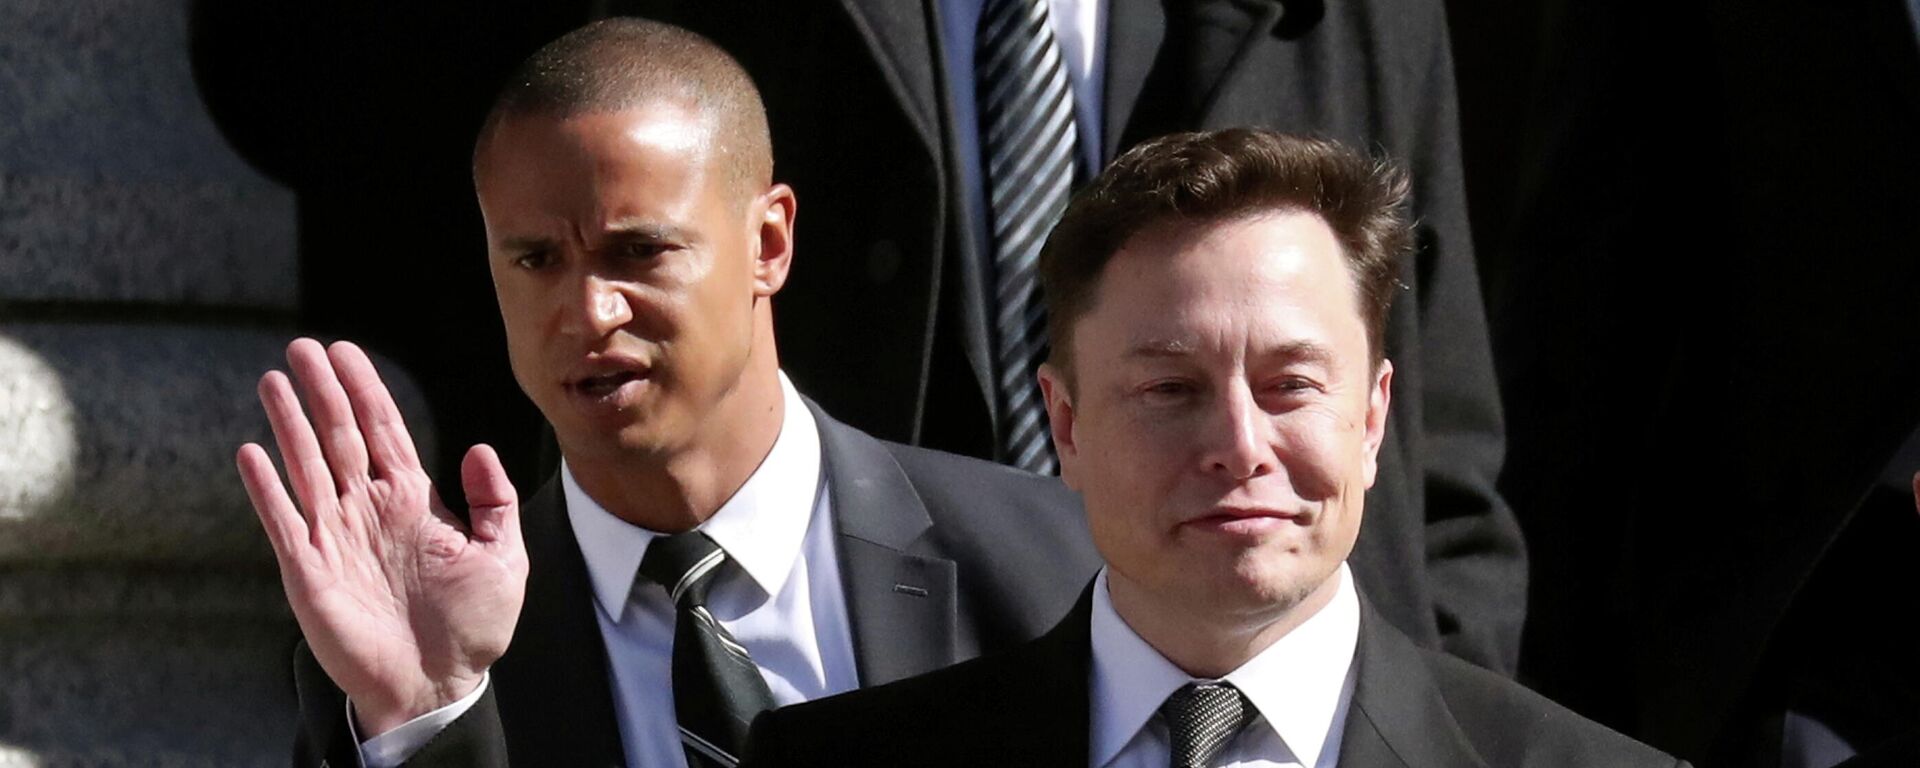 Tesla CEO Elon Musk leaves Manhattan federal court after a hearing on his fraud settlement with the Securities and Exchange Commission (SEC) in New York City, U.S., April 4, 2019. - Sputnik International, 1920, 29.09.2021